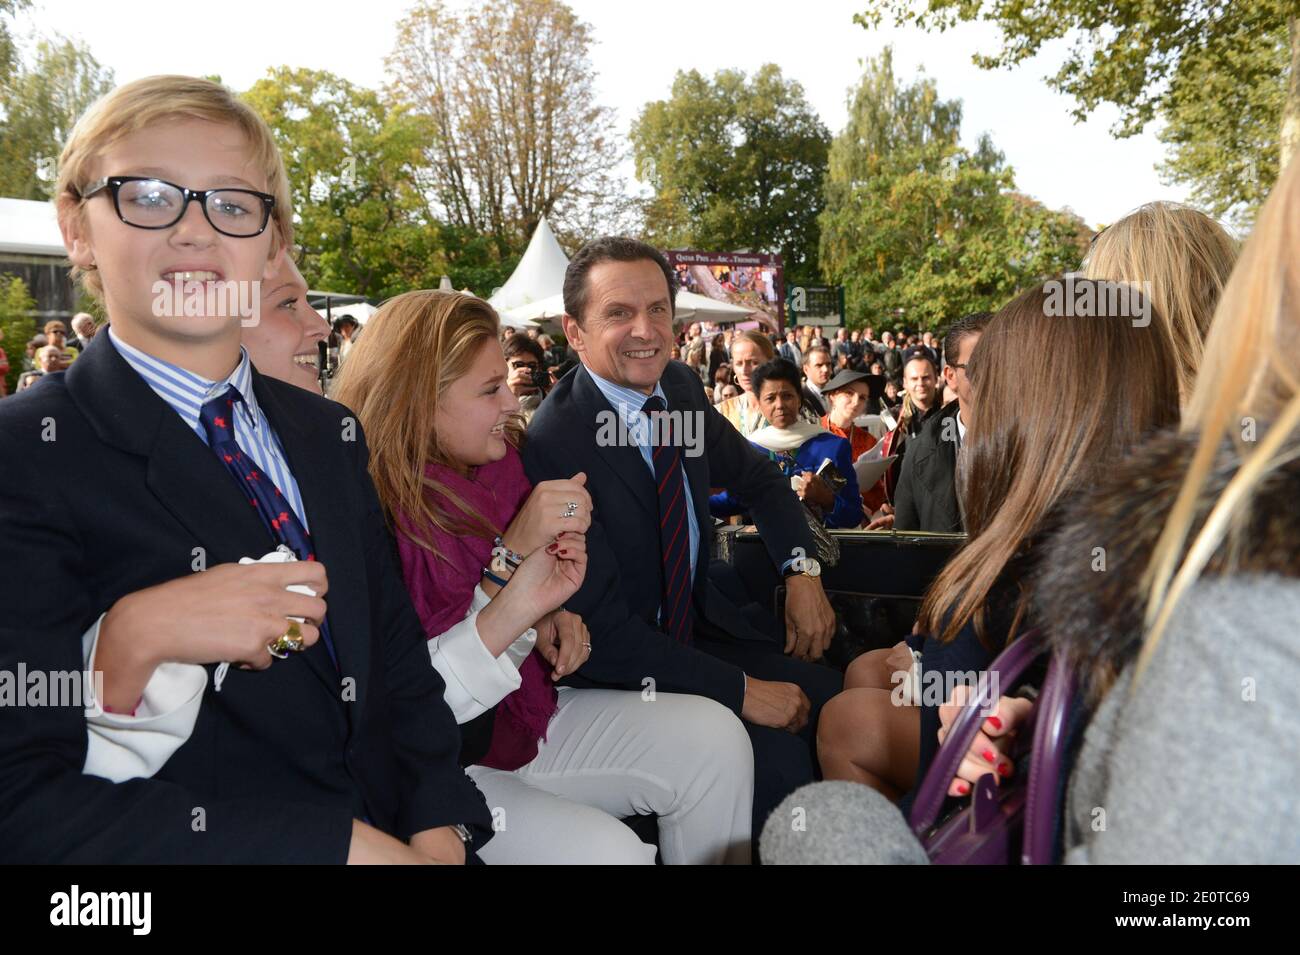 Members of the Wertheimer family (owners of Chanel fashion brand) seen at  the 91st edition of the Prix De L'Arc De Triomphe (now Qatar Prix de l'Arc  de Triomphe) meeting at Longchamp